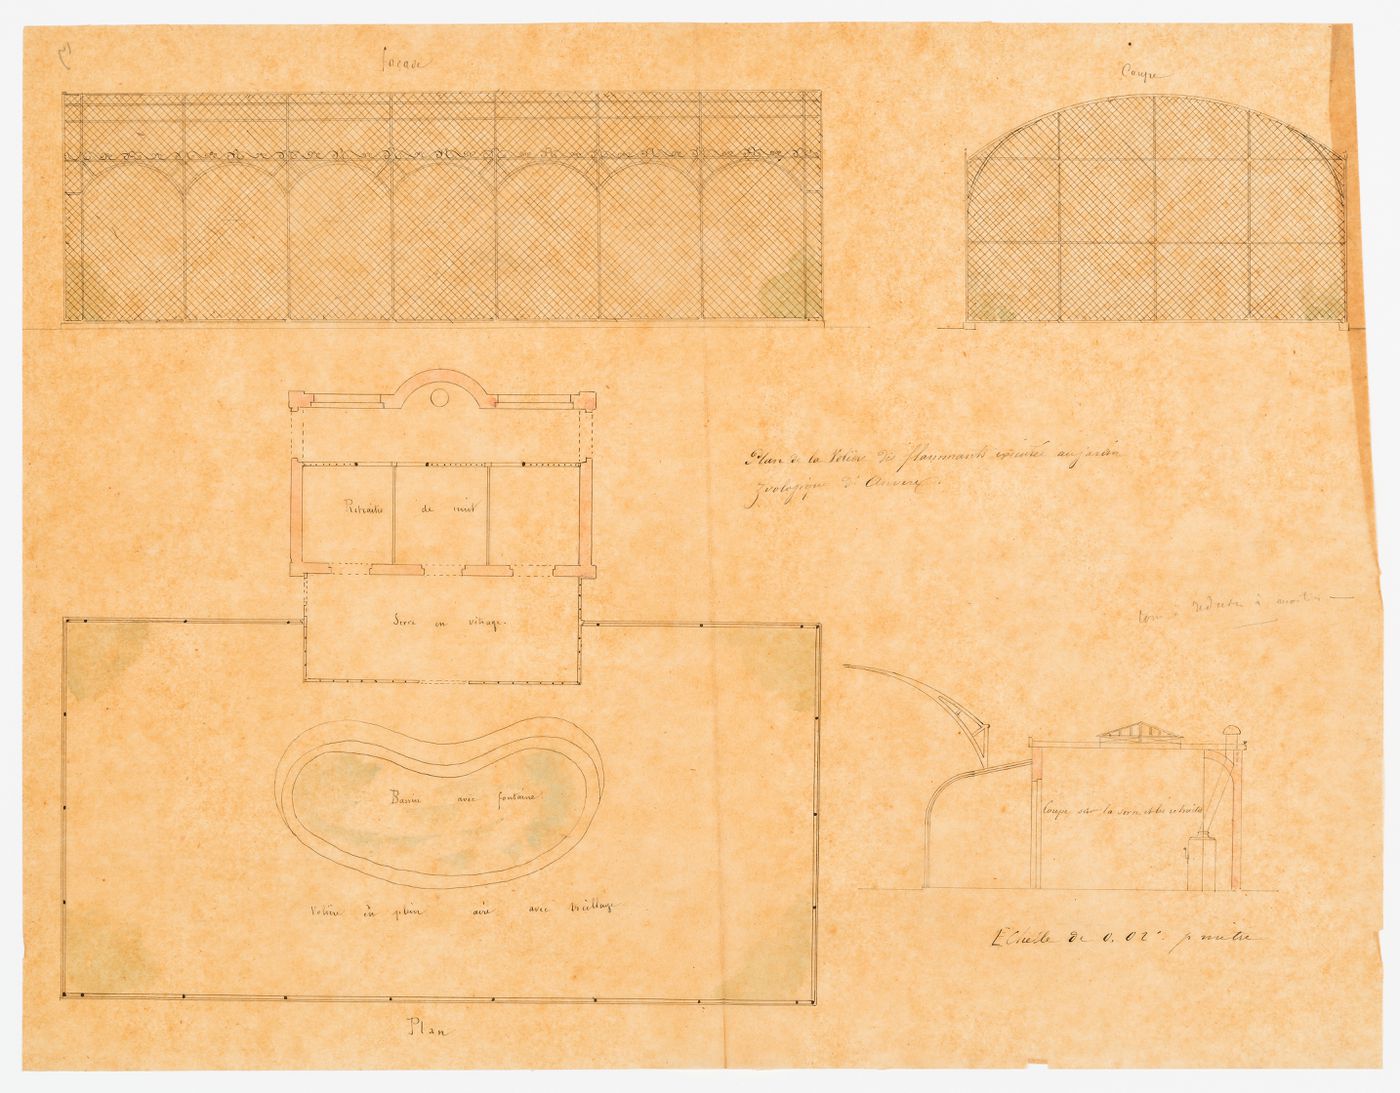 Zoological garden, Antwerp: Elevation, plan, and section of the flamingo aviary